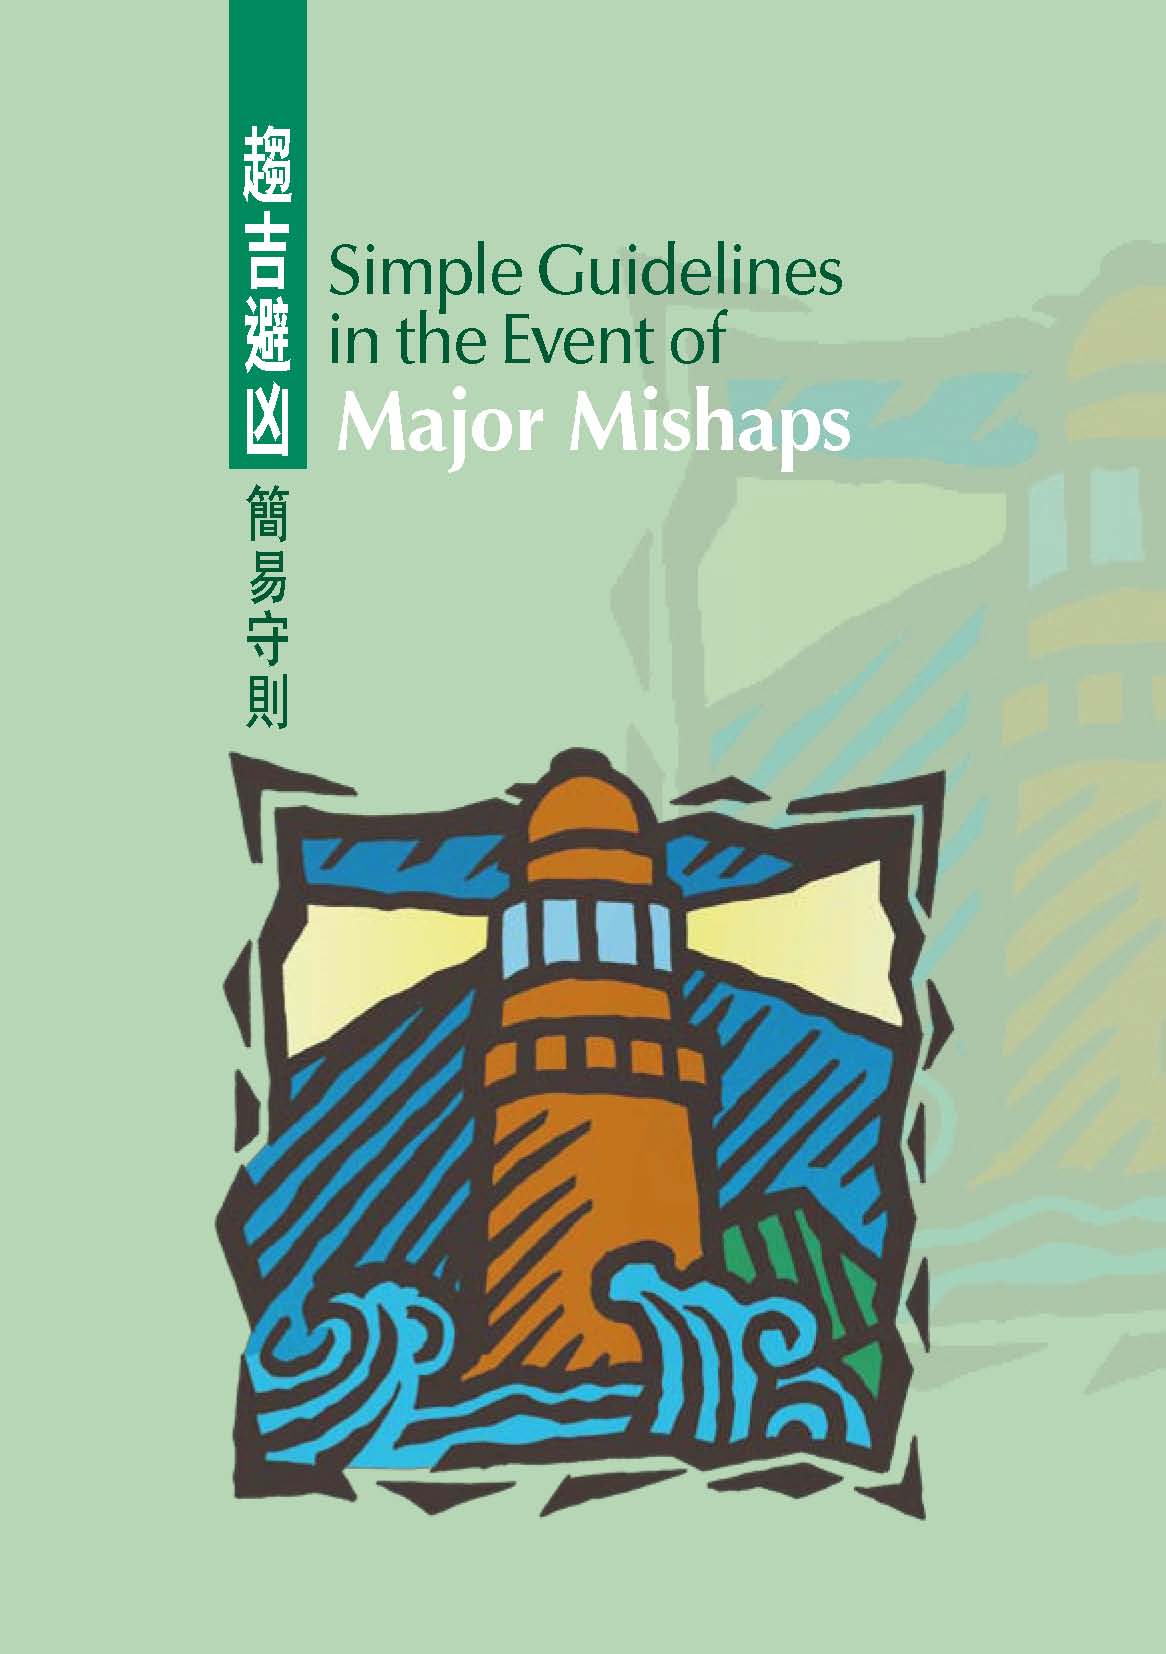 Simple Guidelenes in the Event of Major Mishaps